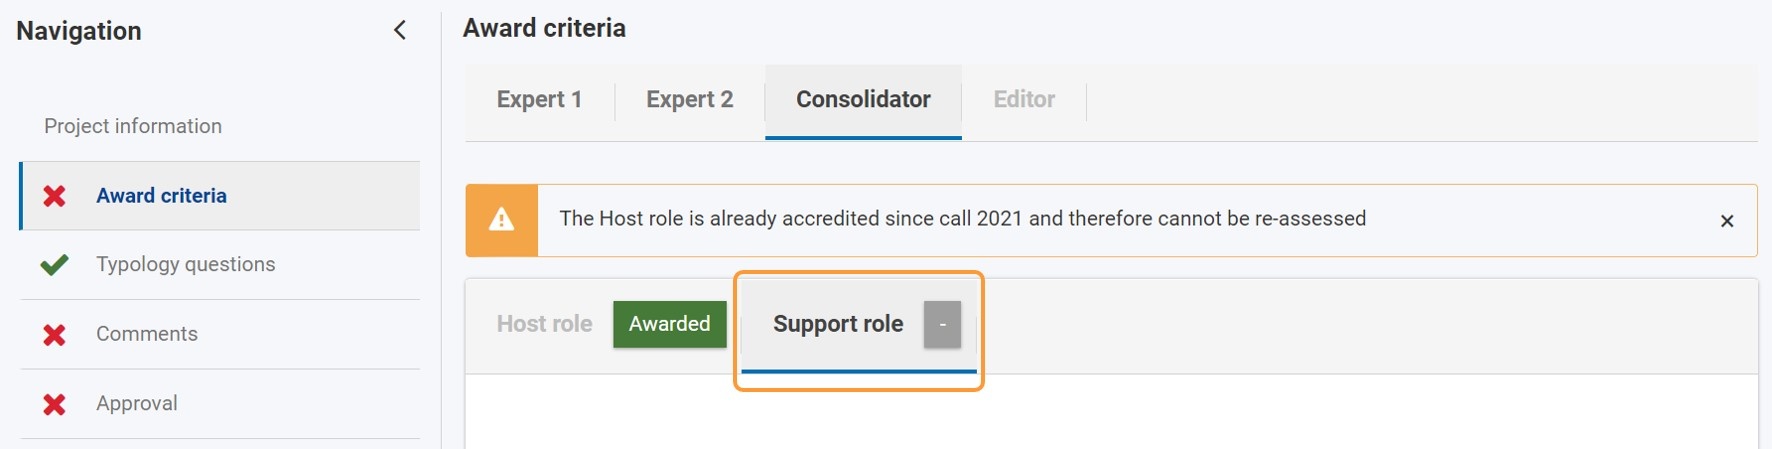 Sub tabs in application assessment for Support role, where Host role attained in previous year